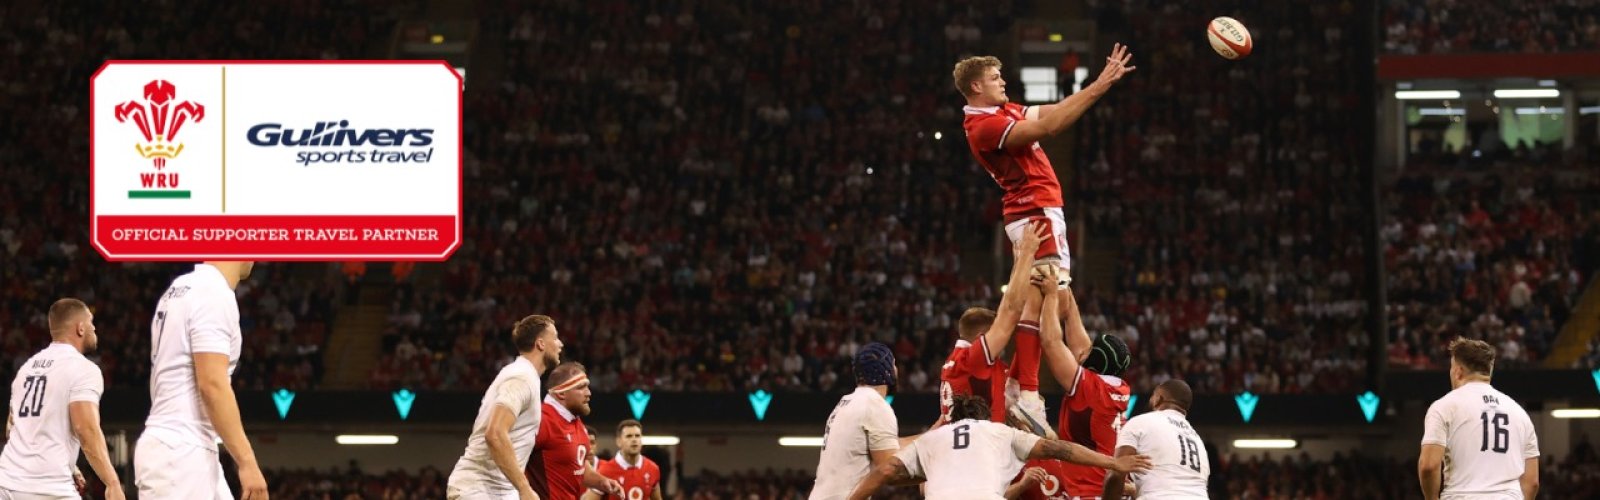 Wales v England Guinness Six Nations ticket packages for rugby fans